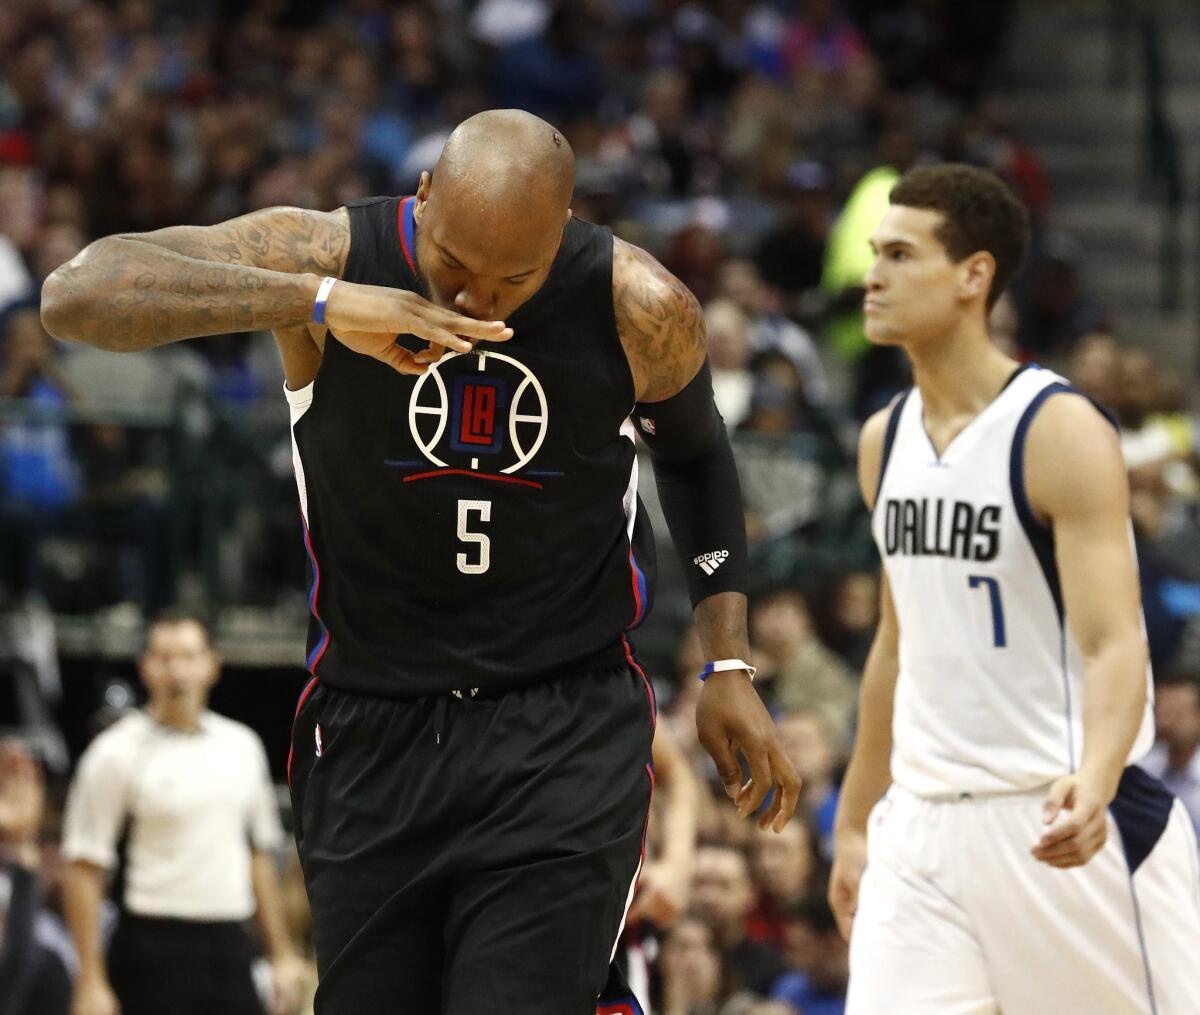 Clippers forward center Marreese Speights after making a three-pointer against the Mavericks in the first half.